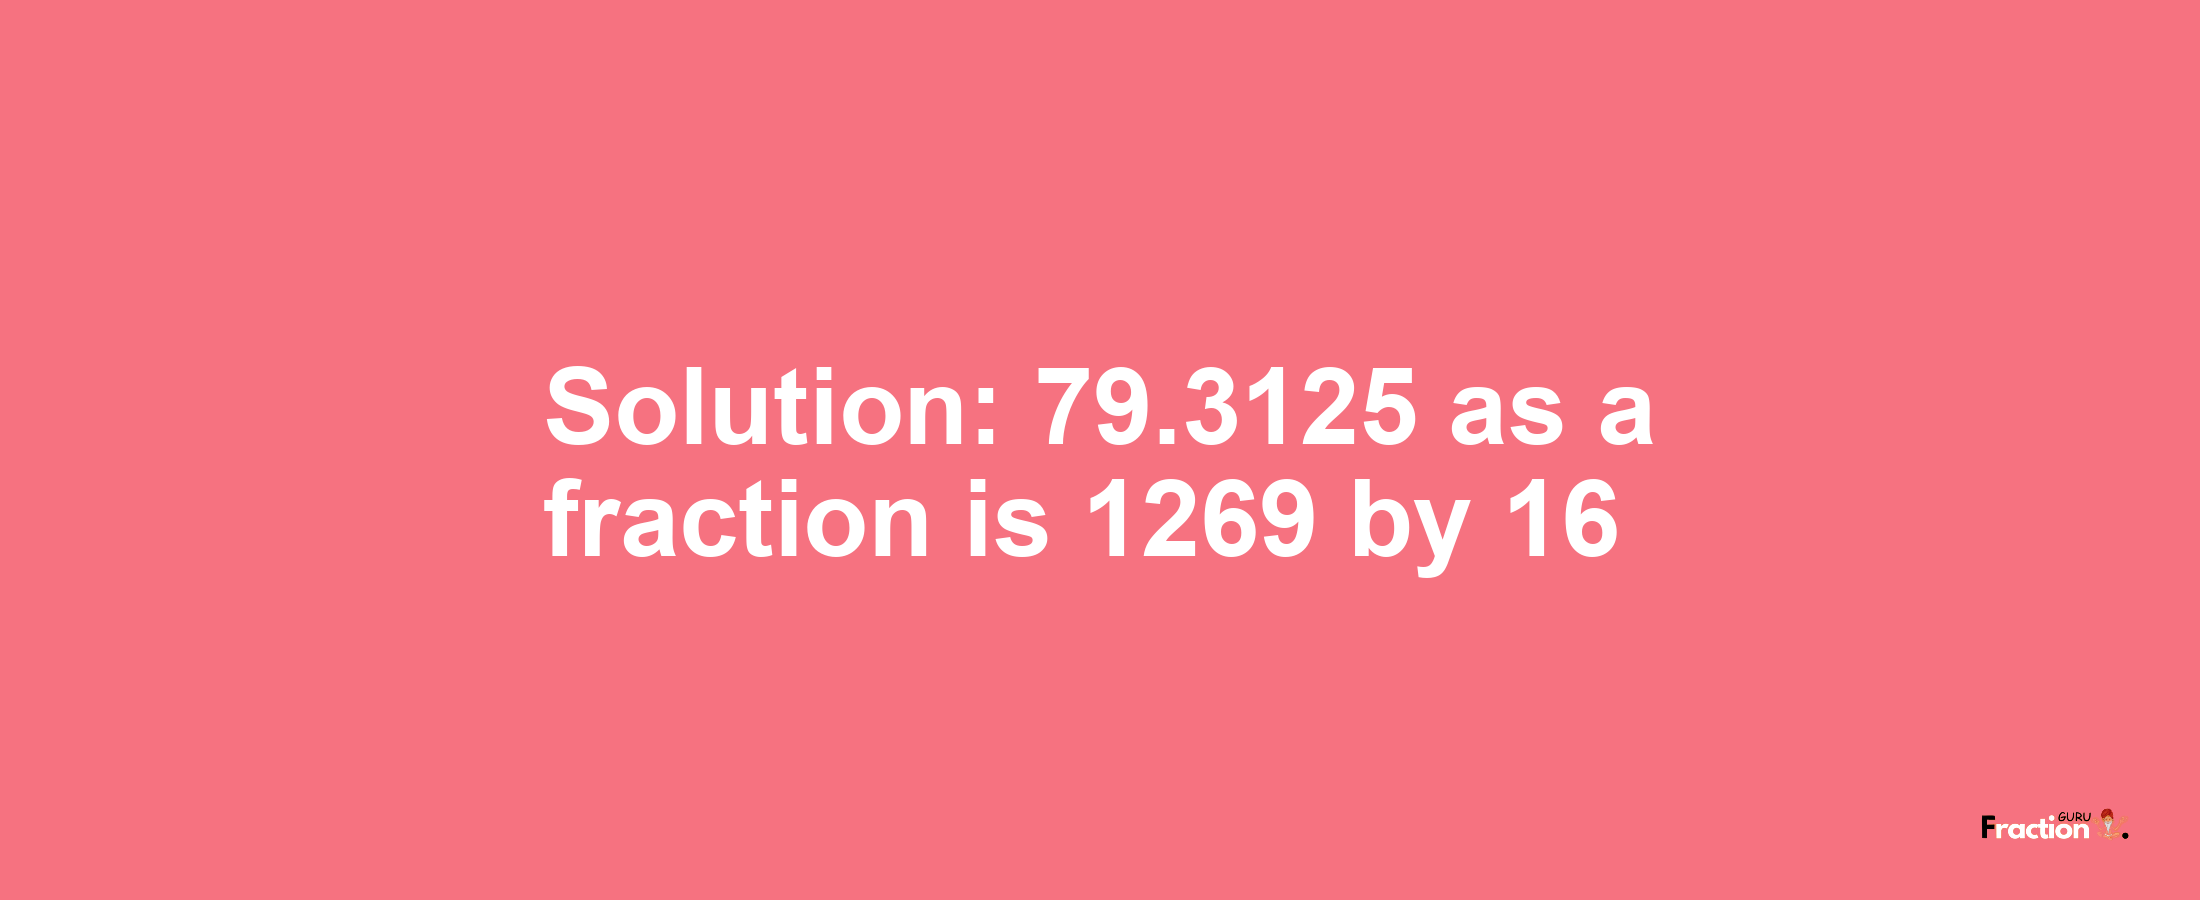 Solution:79.3125 as a fraction is 1269/16